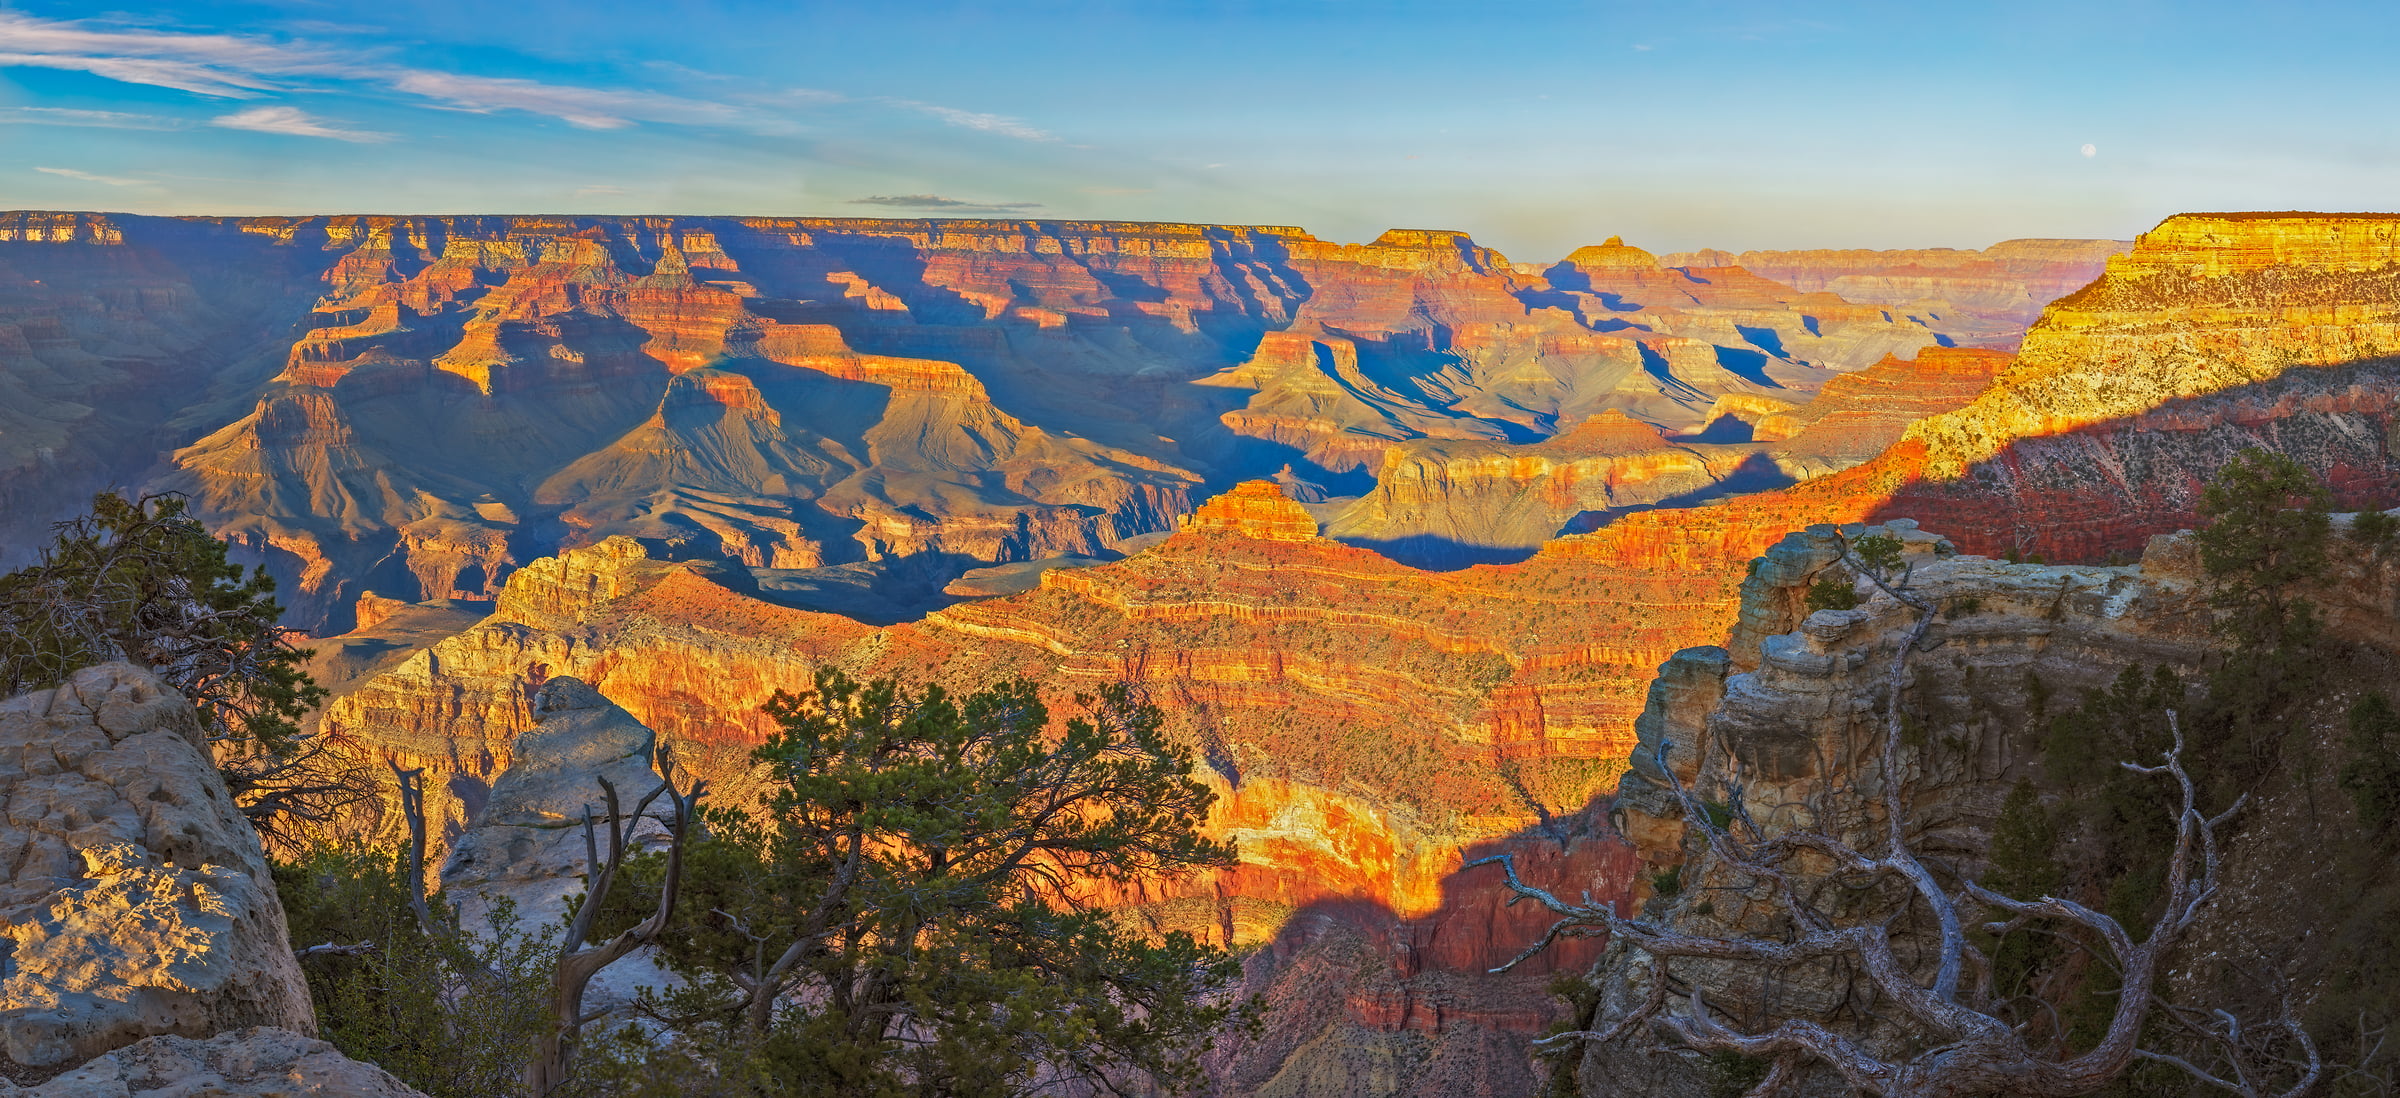 2,278 megapixels! An ultra-high-resolution, large-format VAST photo print of the Grand Canyon at sunset; landscape photograph created by John Freeman in Rim Trail, South Rim, Grand Canyon National Park, Arizona.